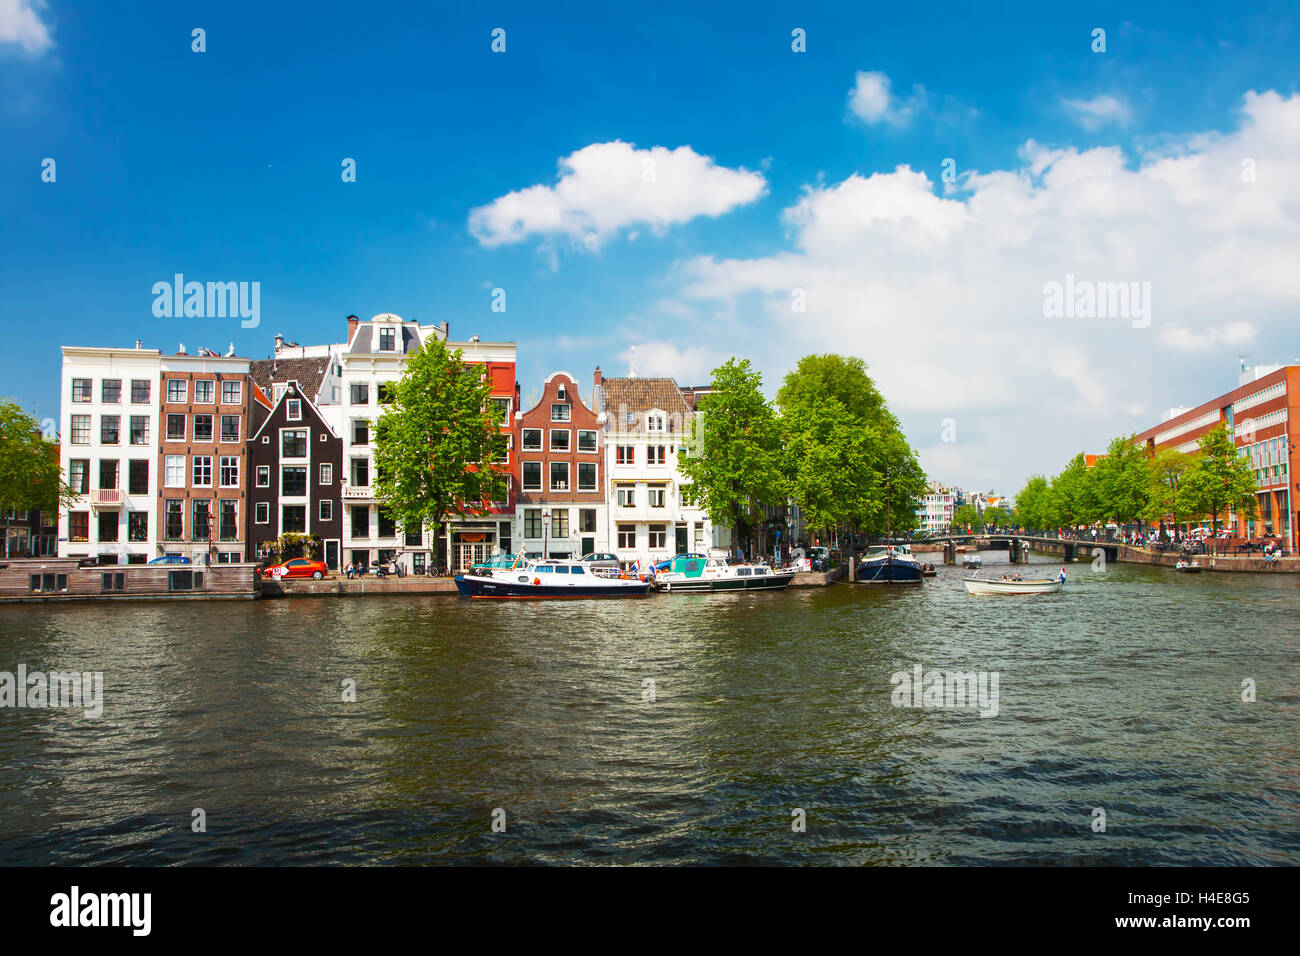 Amsterdam, Netherlands - City view in Amsterdam with water channel Stock Photo